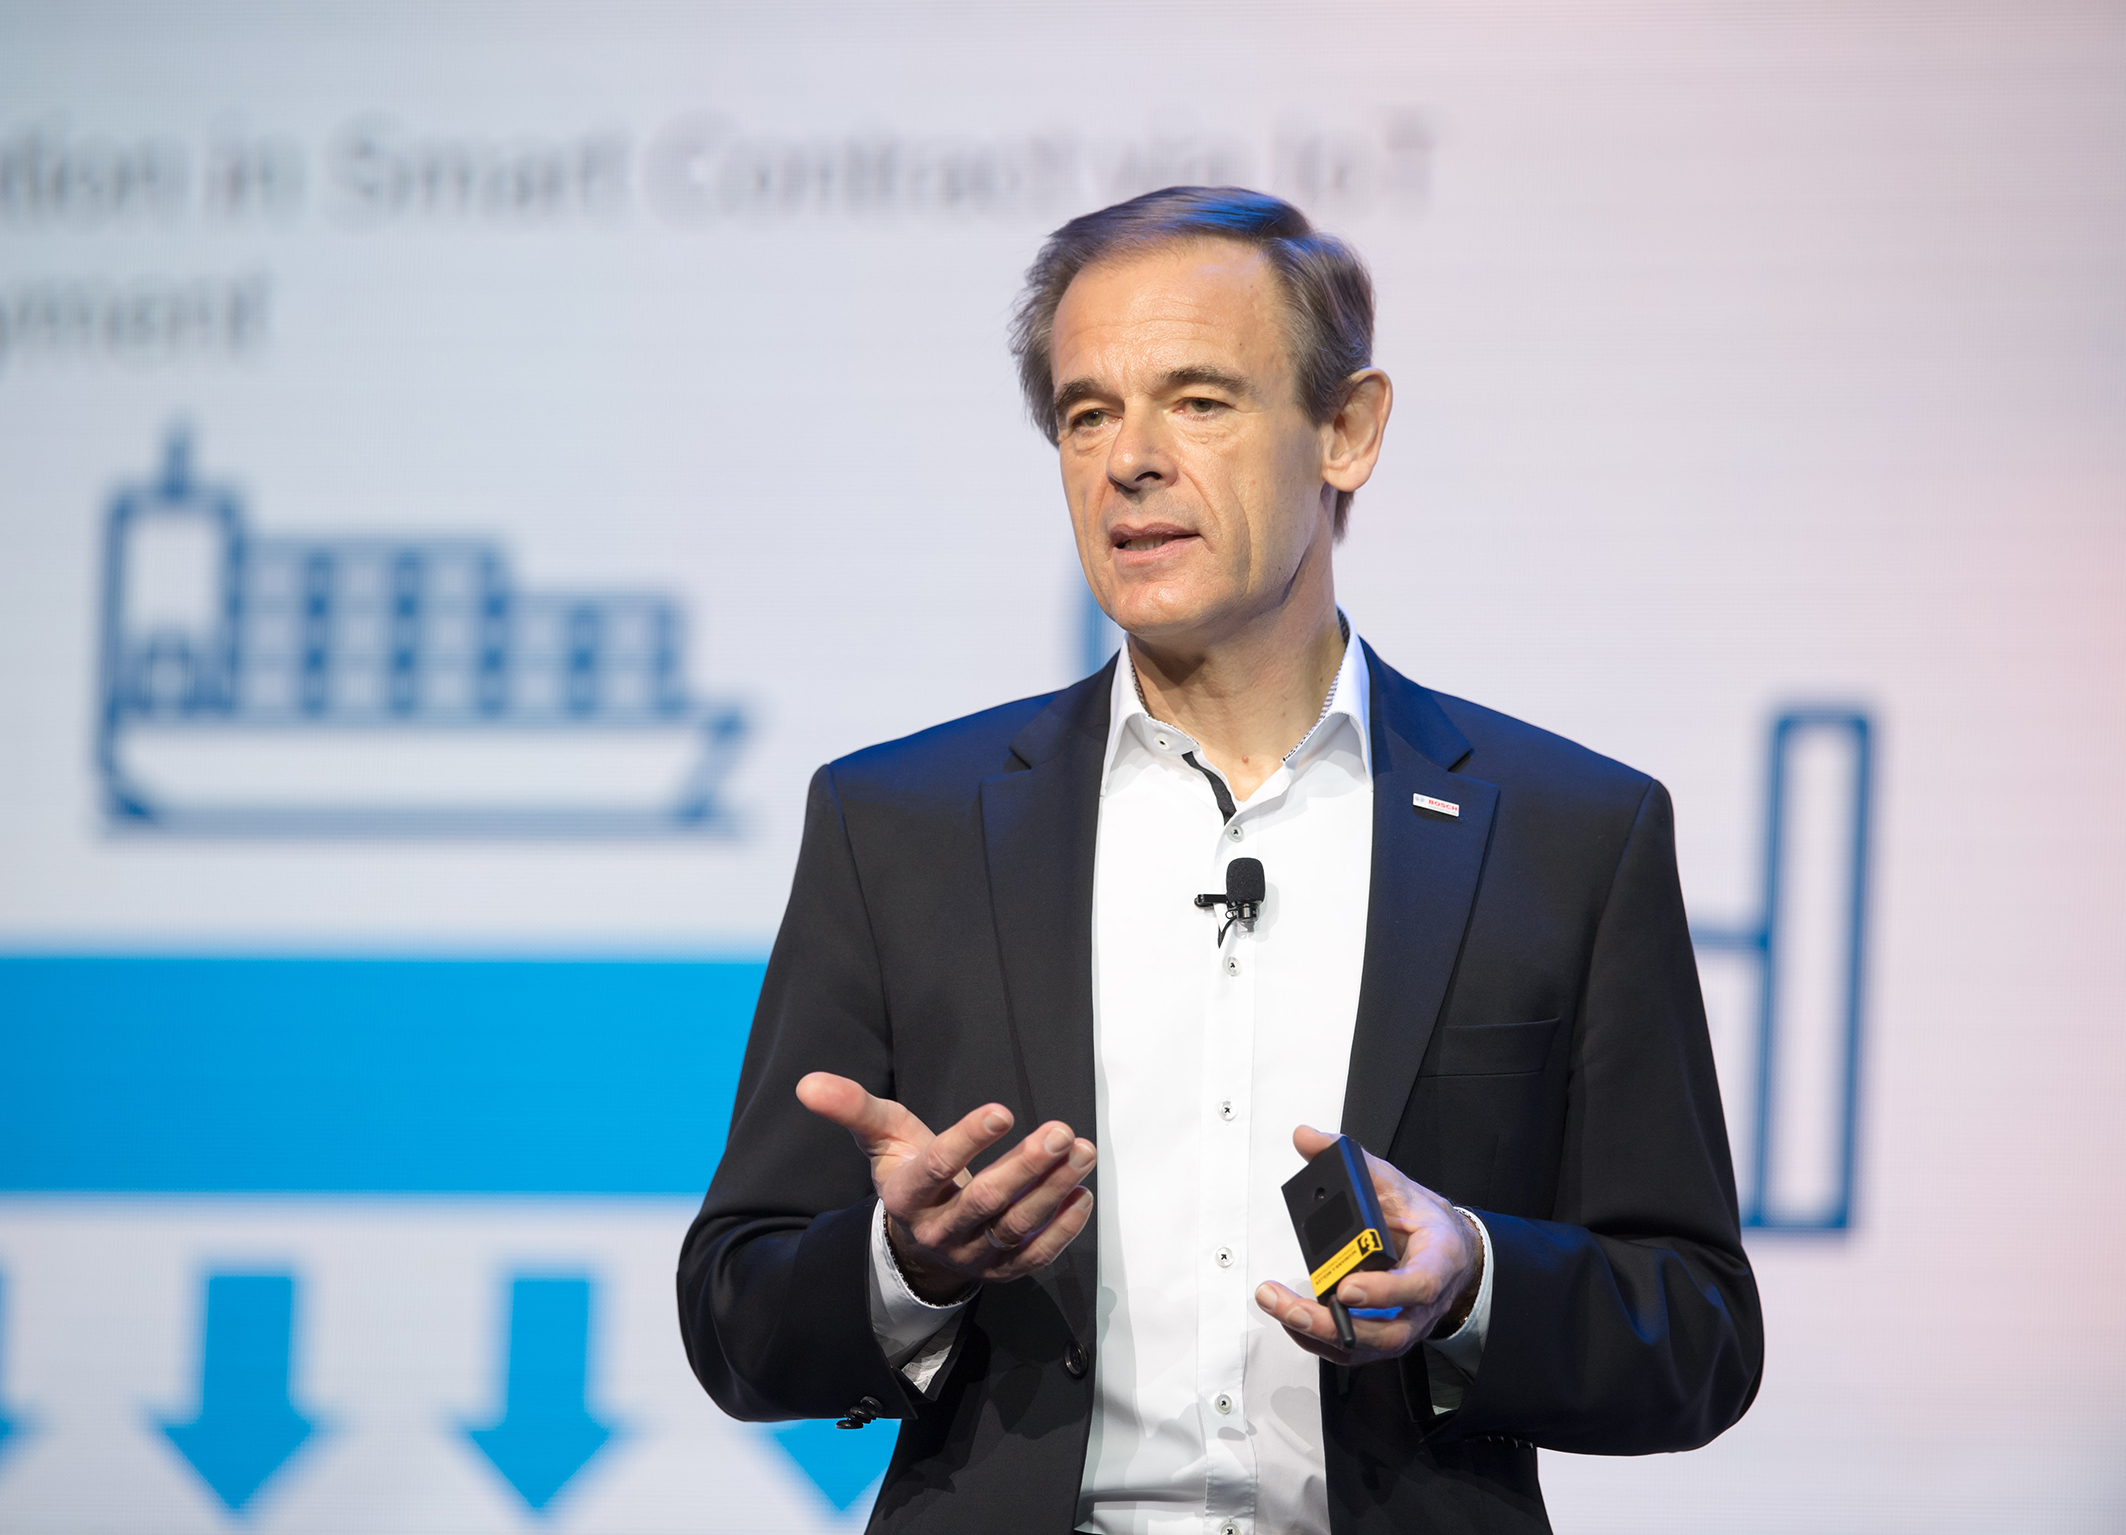 Taking the IoT to the next level: Bosch CEO Dr. Volkmar Denner, Keynote Taking the IoT to the next level, Bosch ConnectedWorld 2017